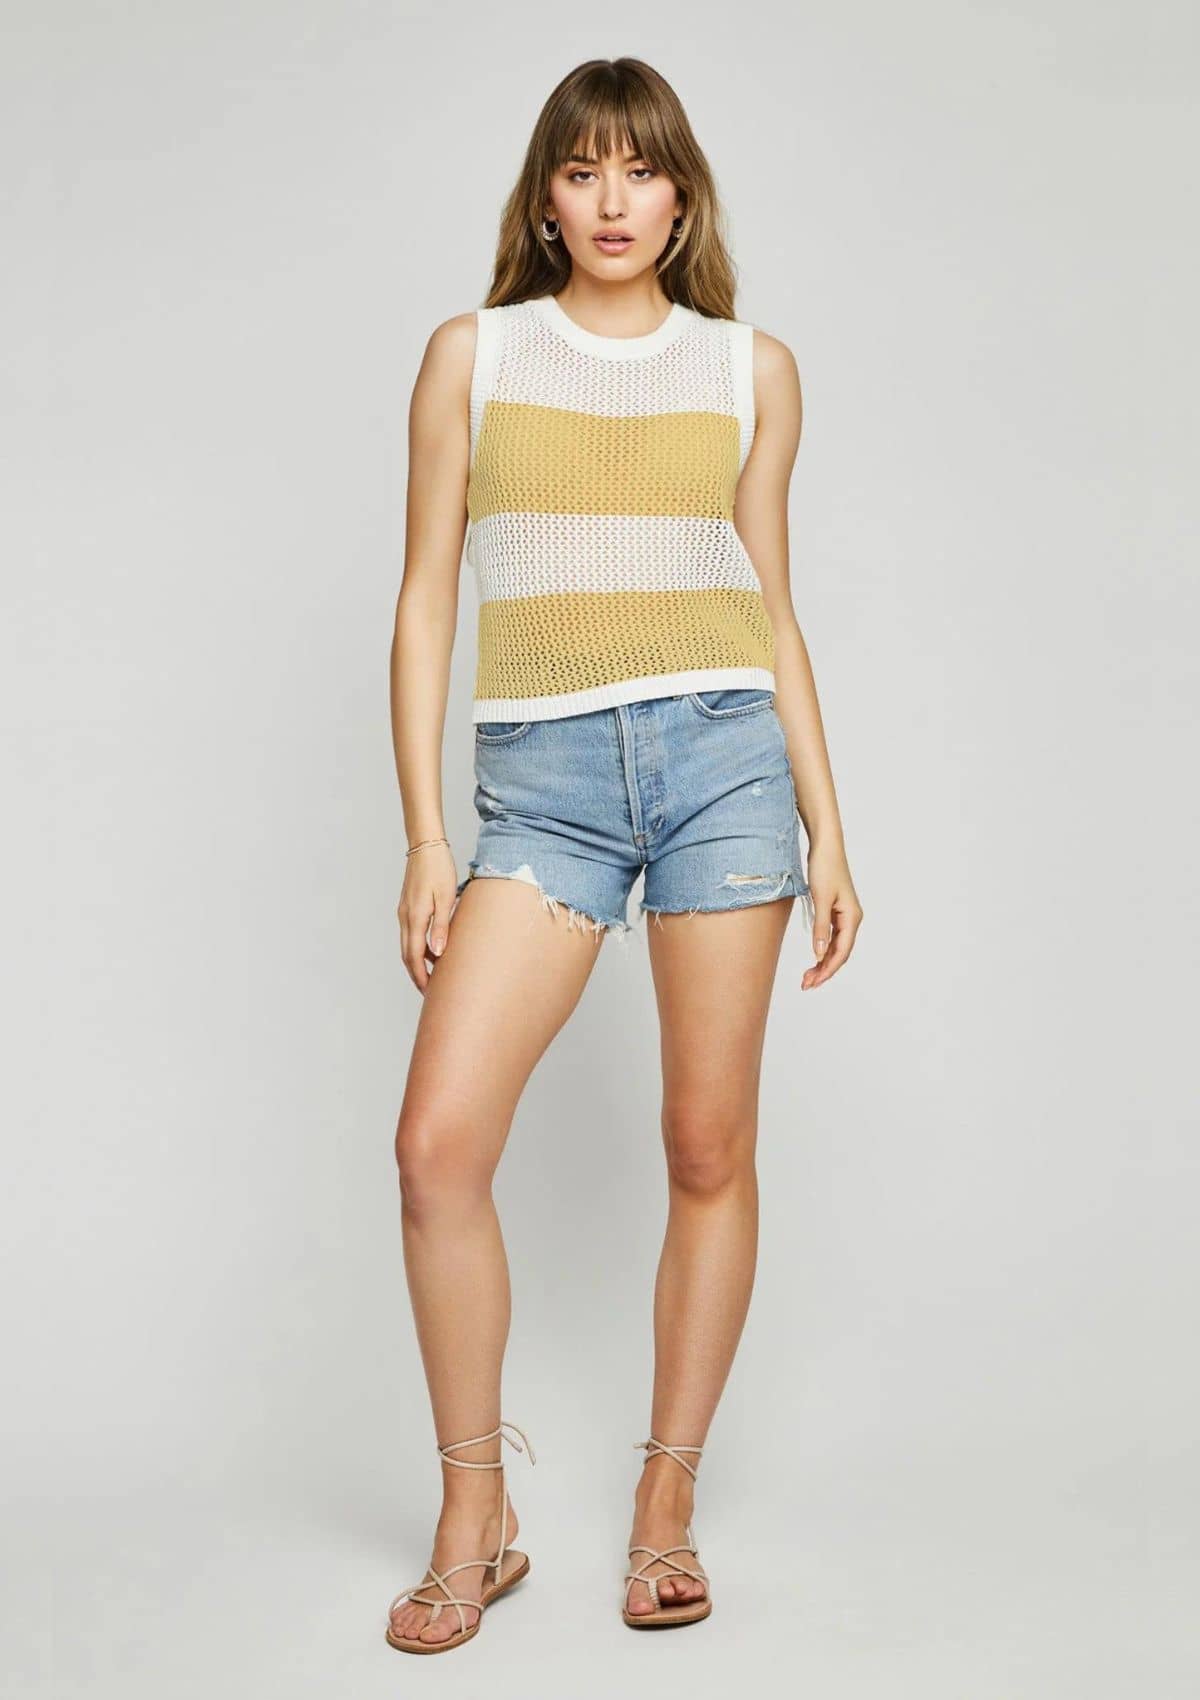 Casual Tops-clothing-Fashion-Yellow and white thick stripes-Ruby Jane.